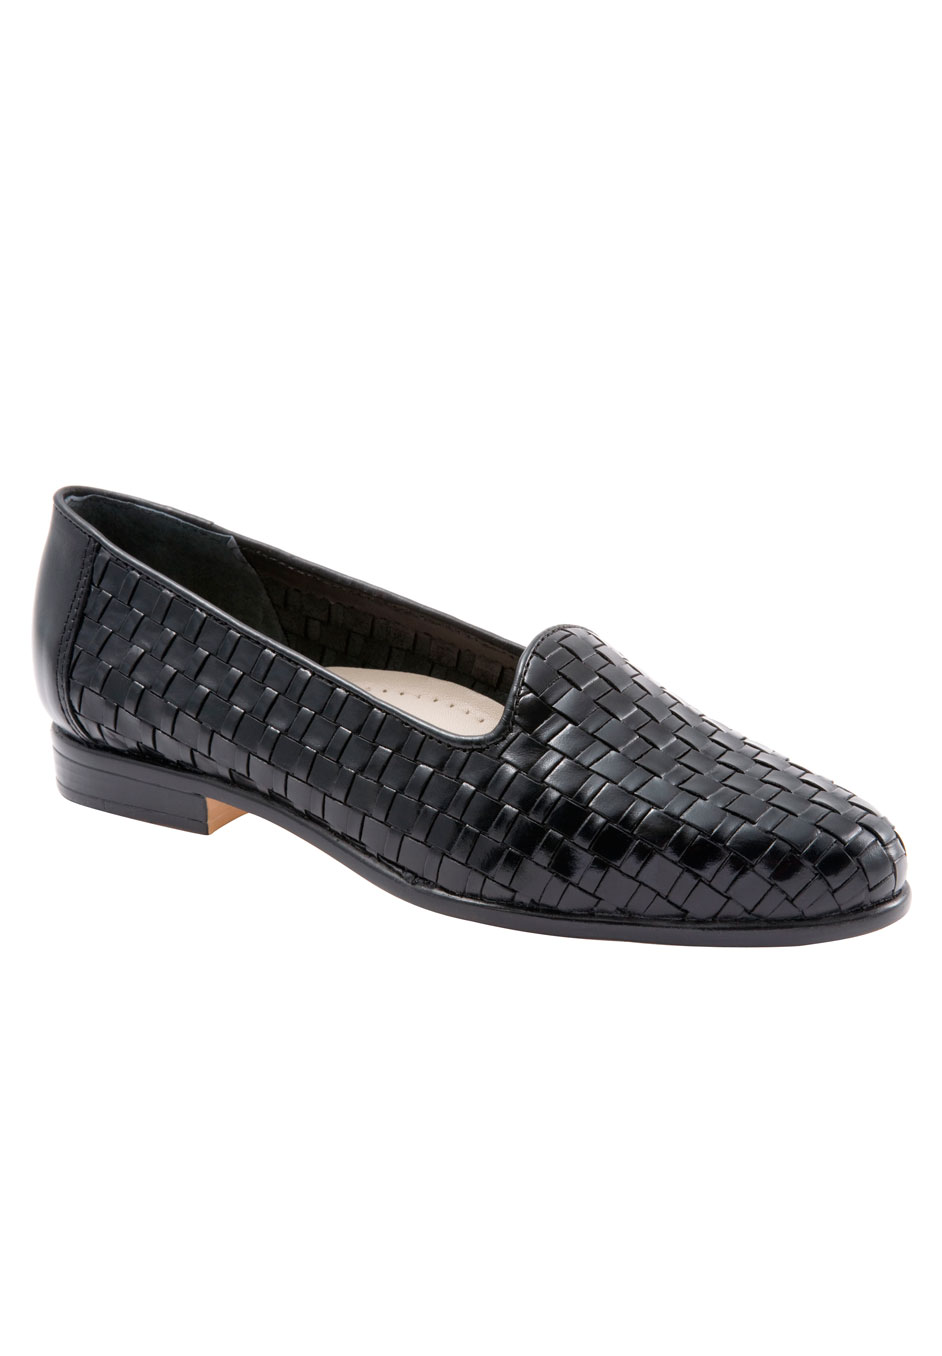 Liz Leather Loafer by Trotters®| Plus Size Flats | Roaman's